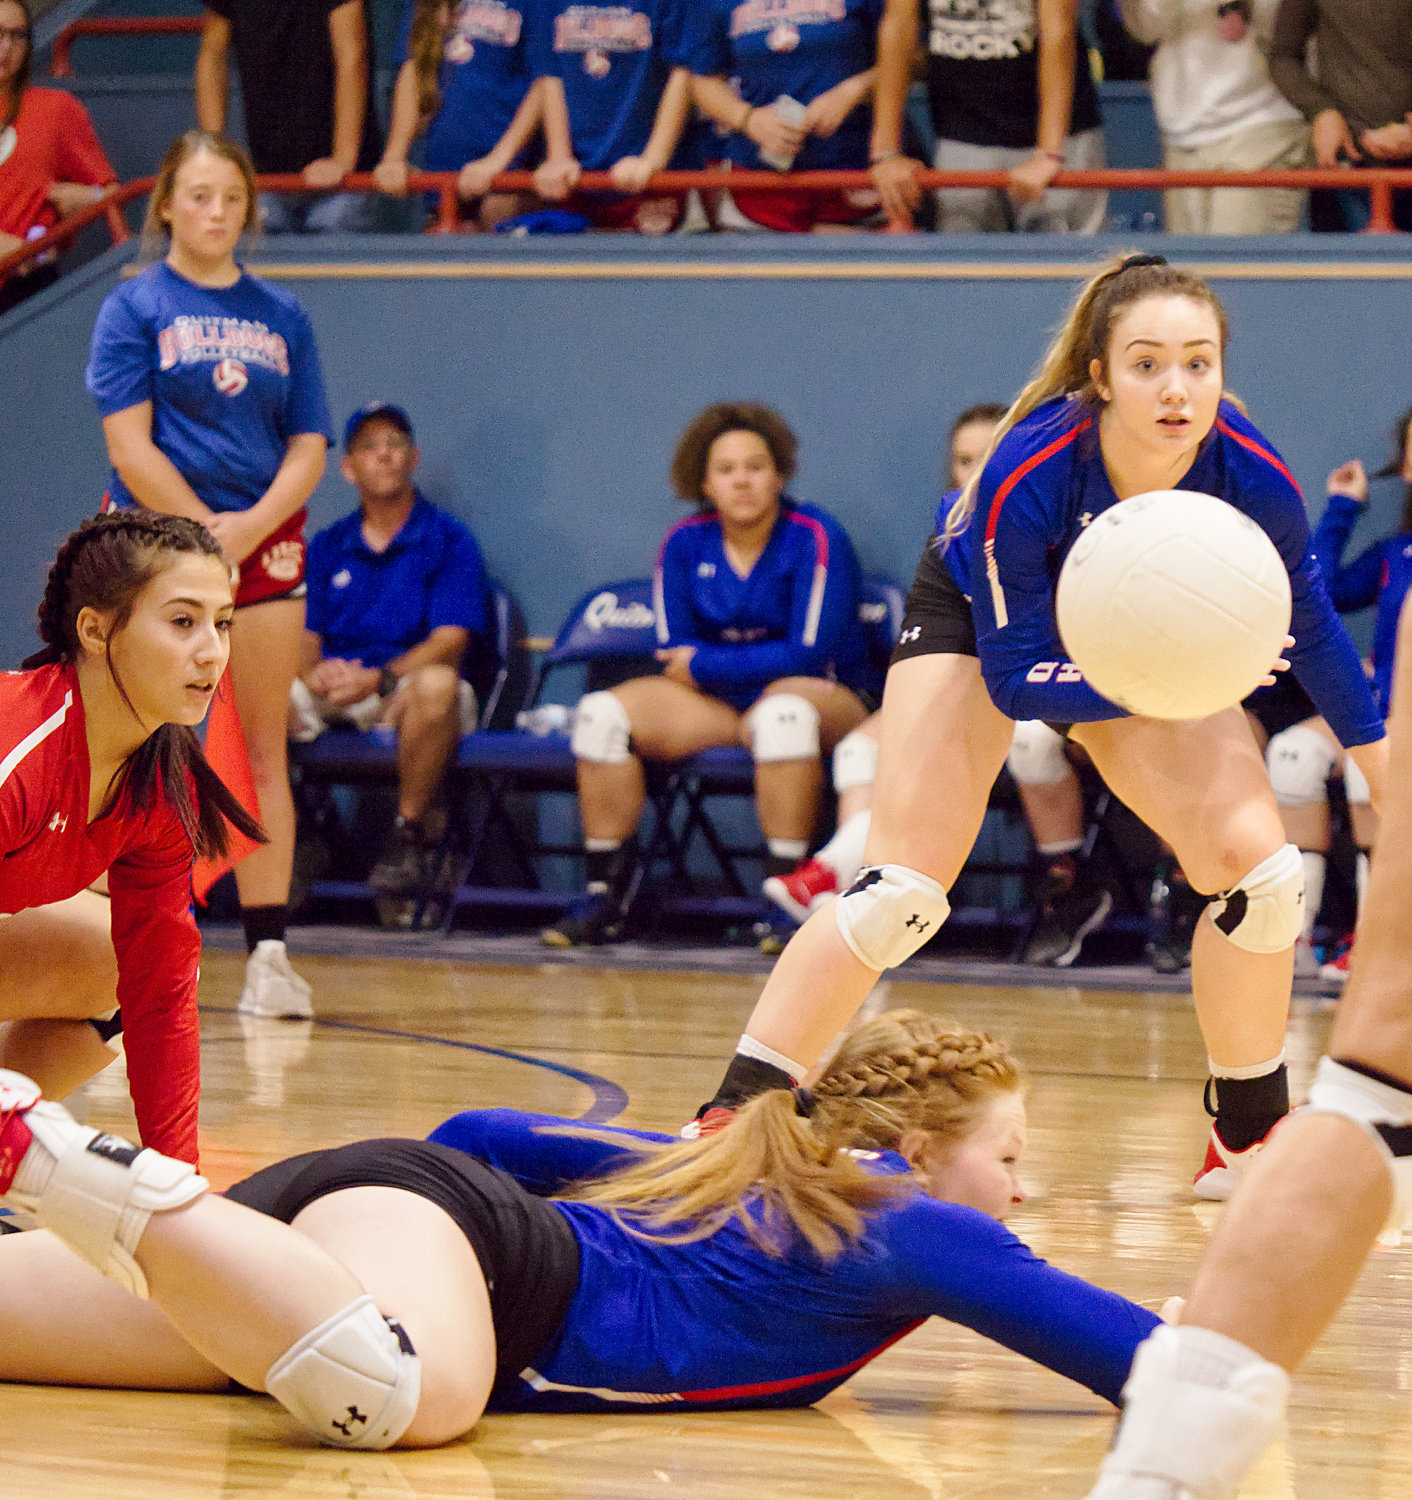 Brooklyn Marcee and Lucy Brannon look on as Shelby Hayes dives for the save for Quitman.